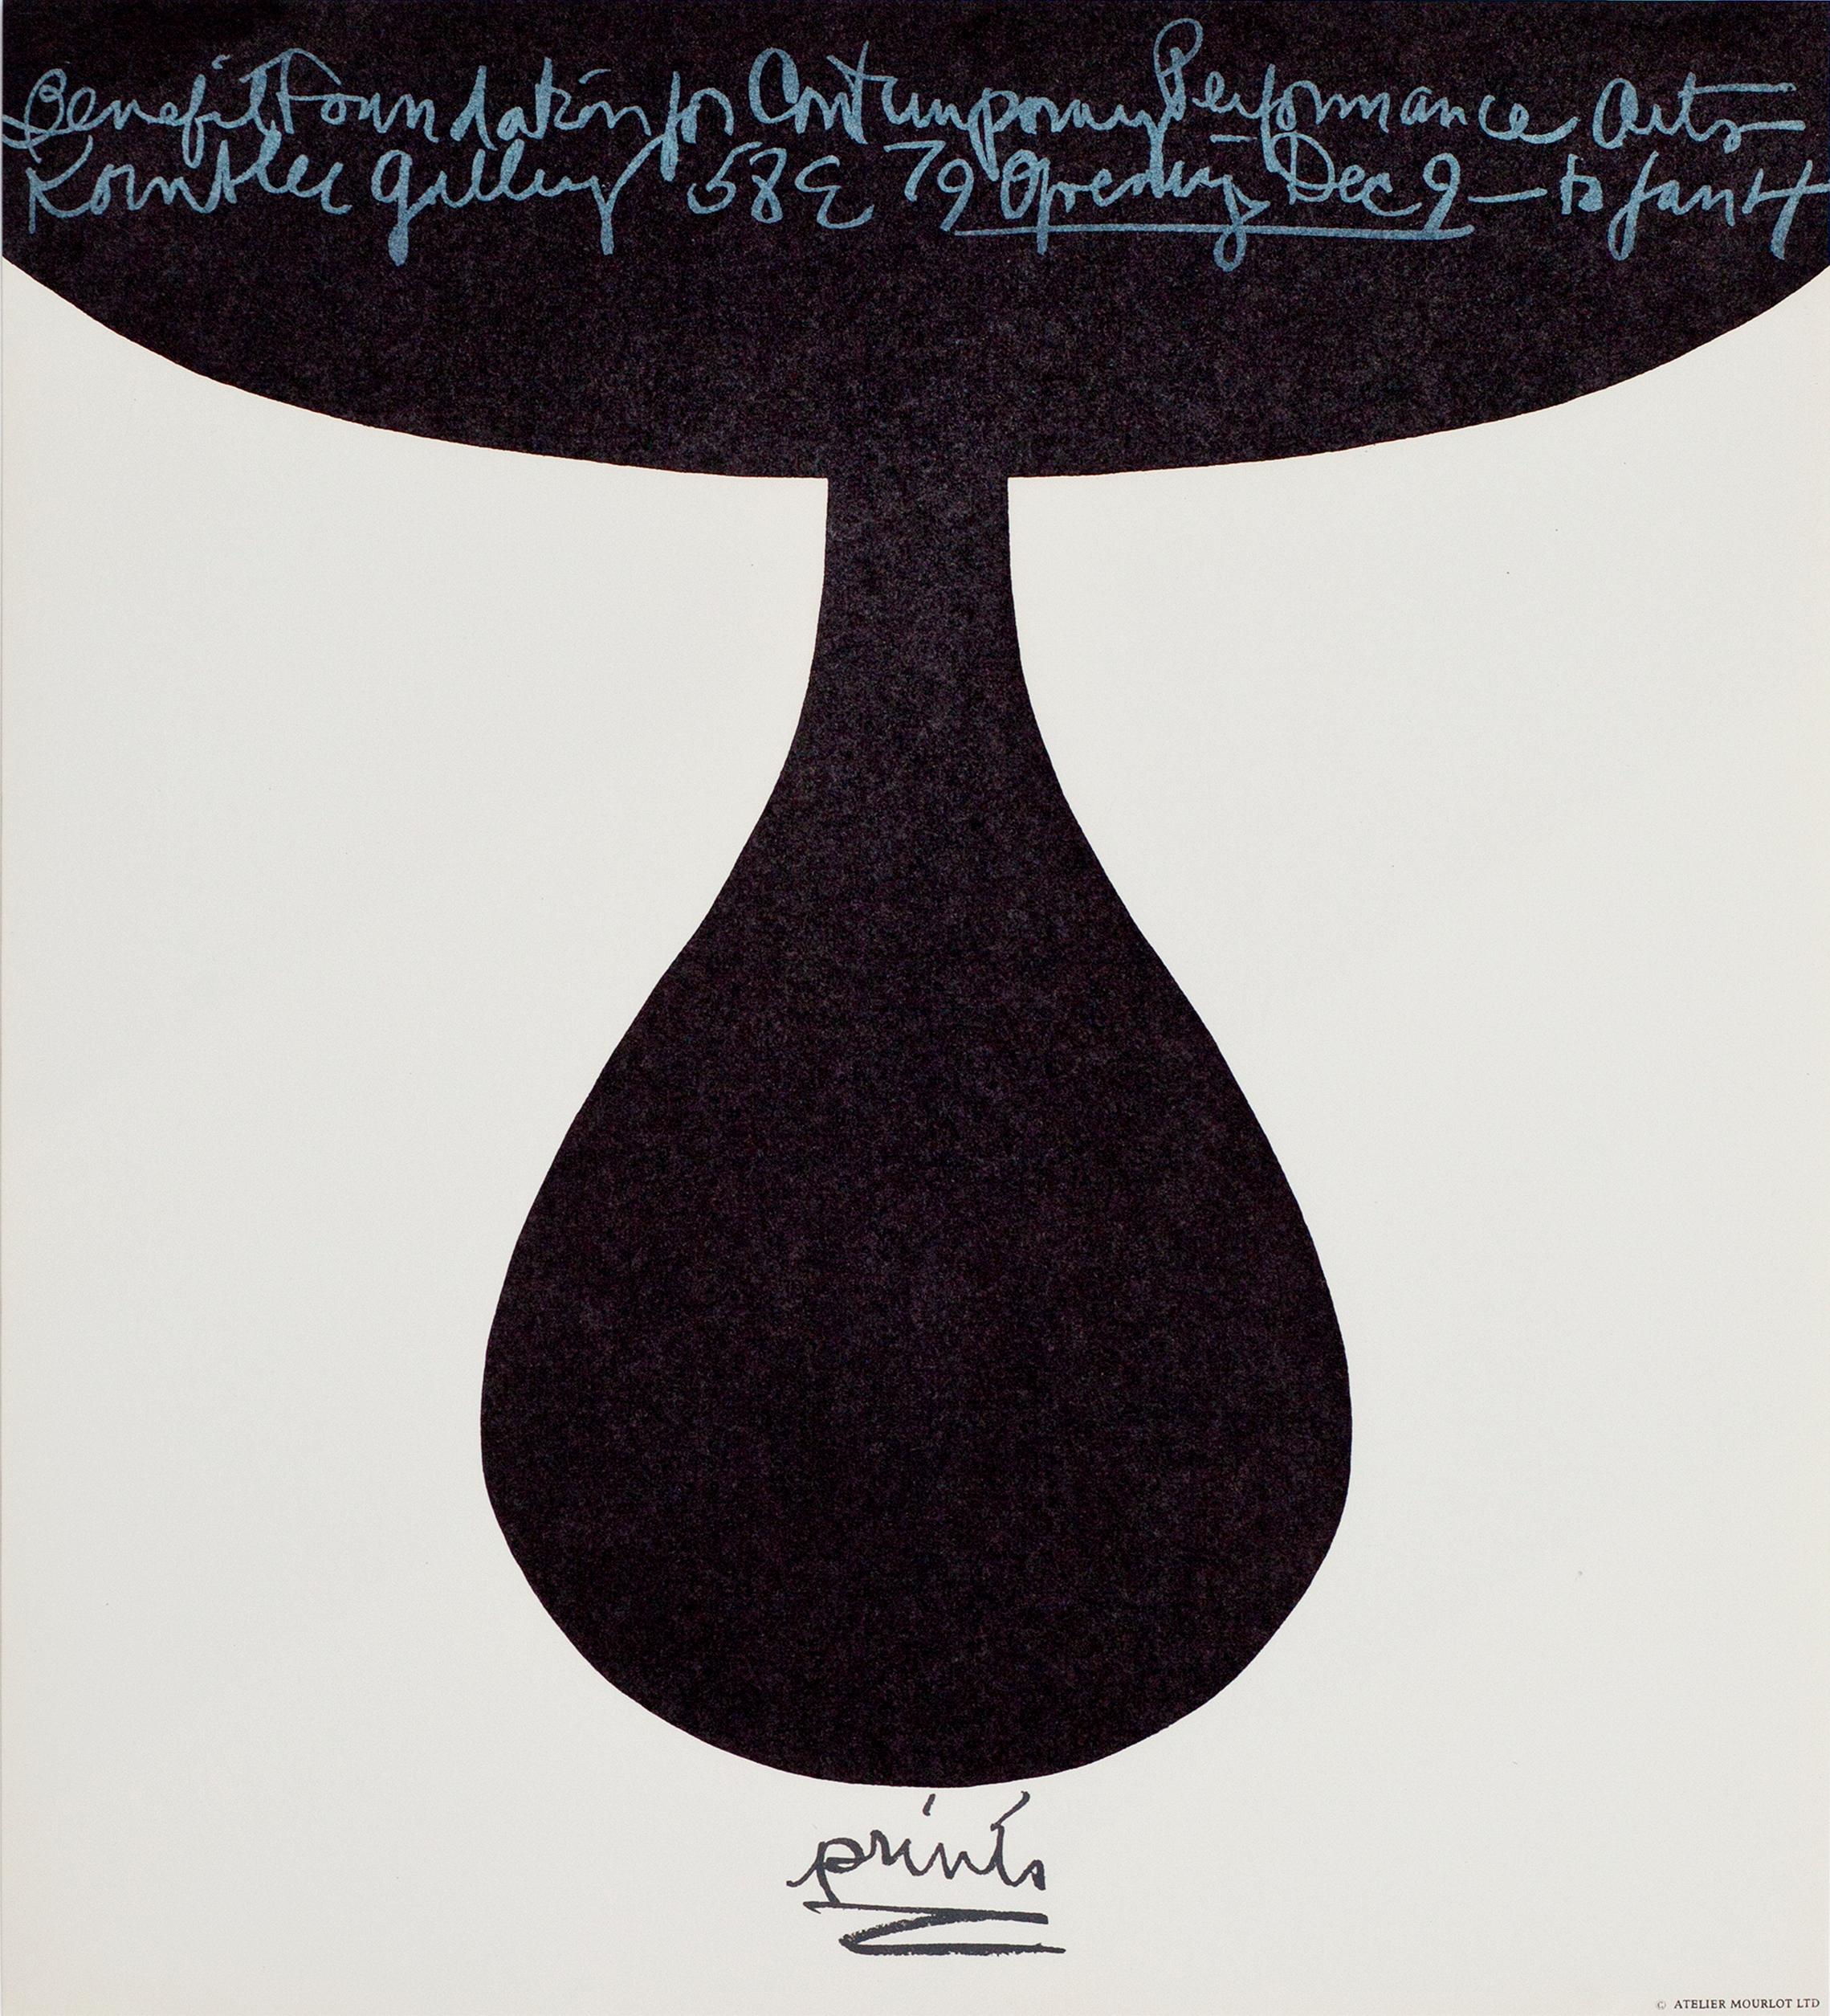 "Prints: To Benefit the Foundation for Contemporary Performance Arts"